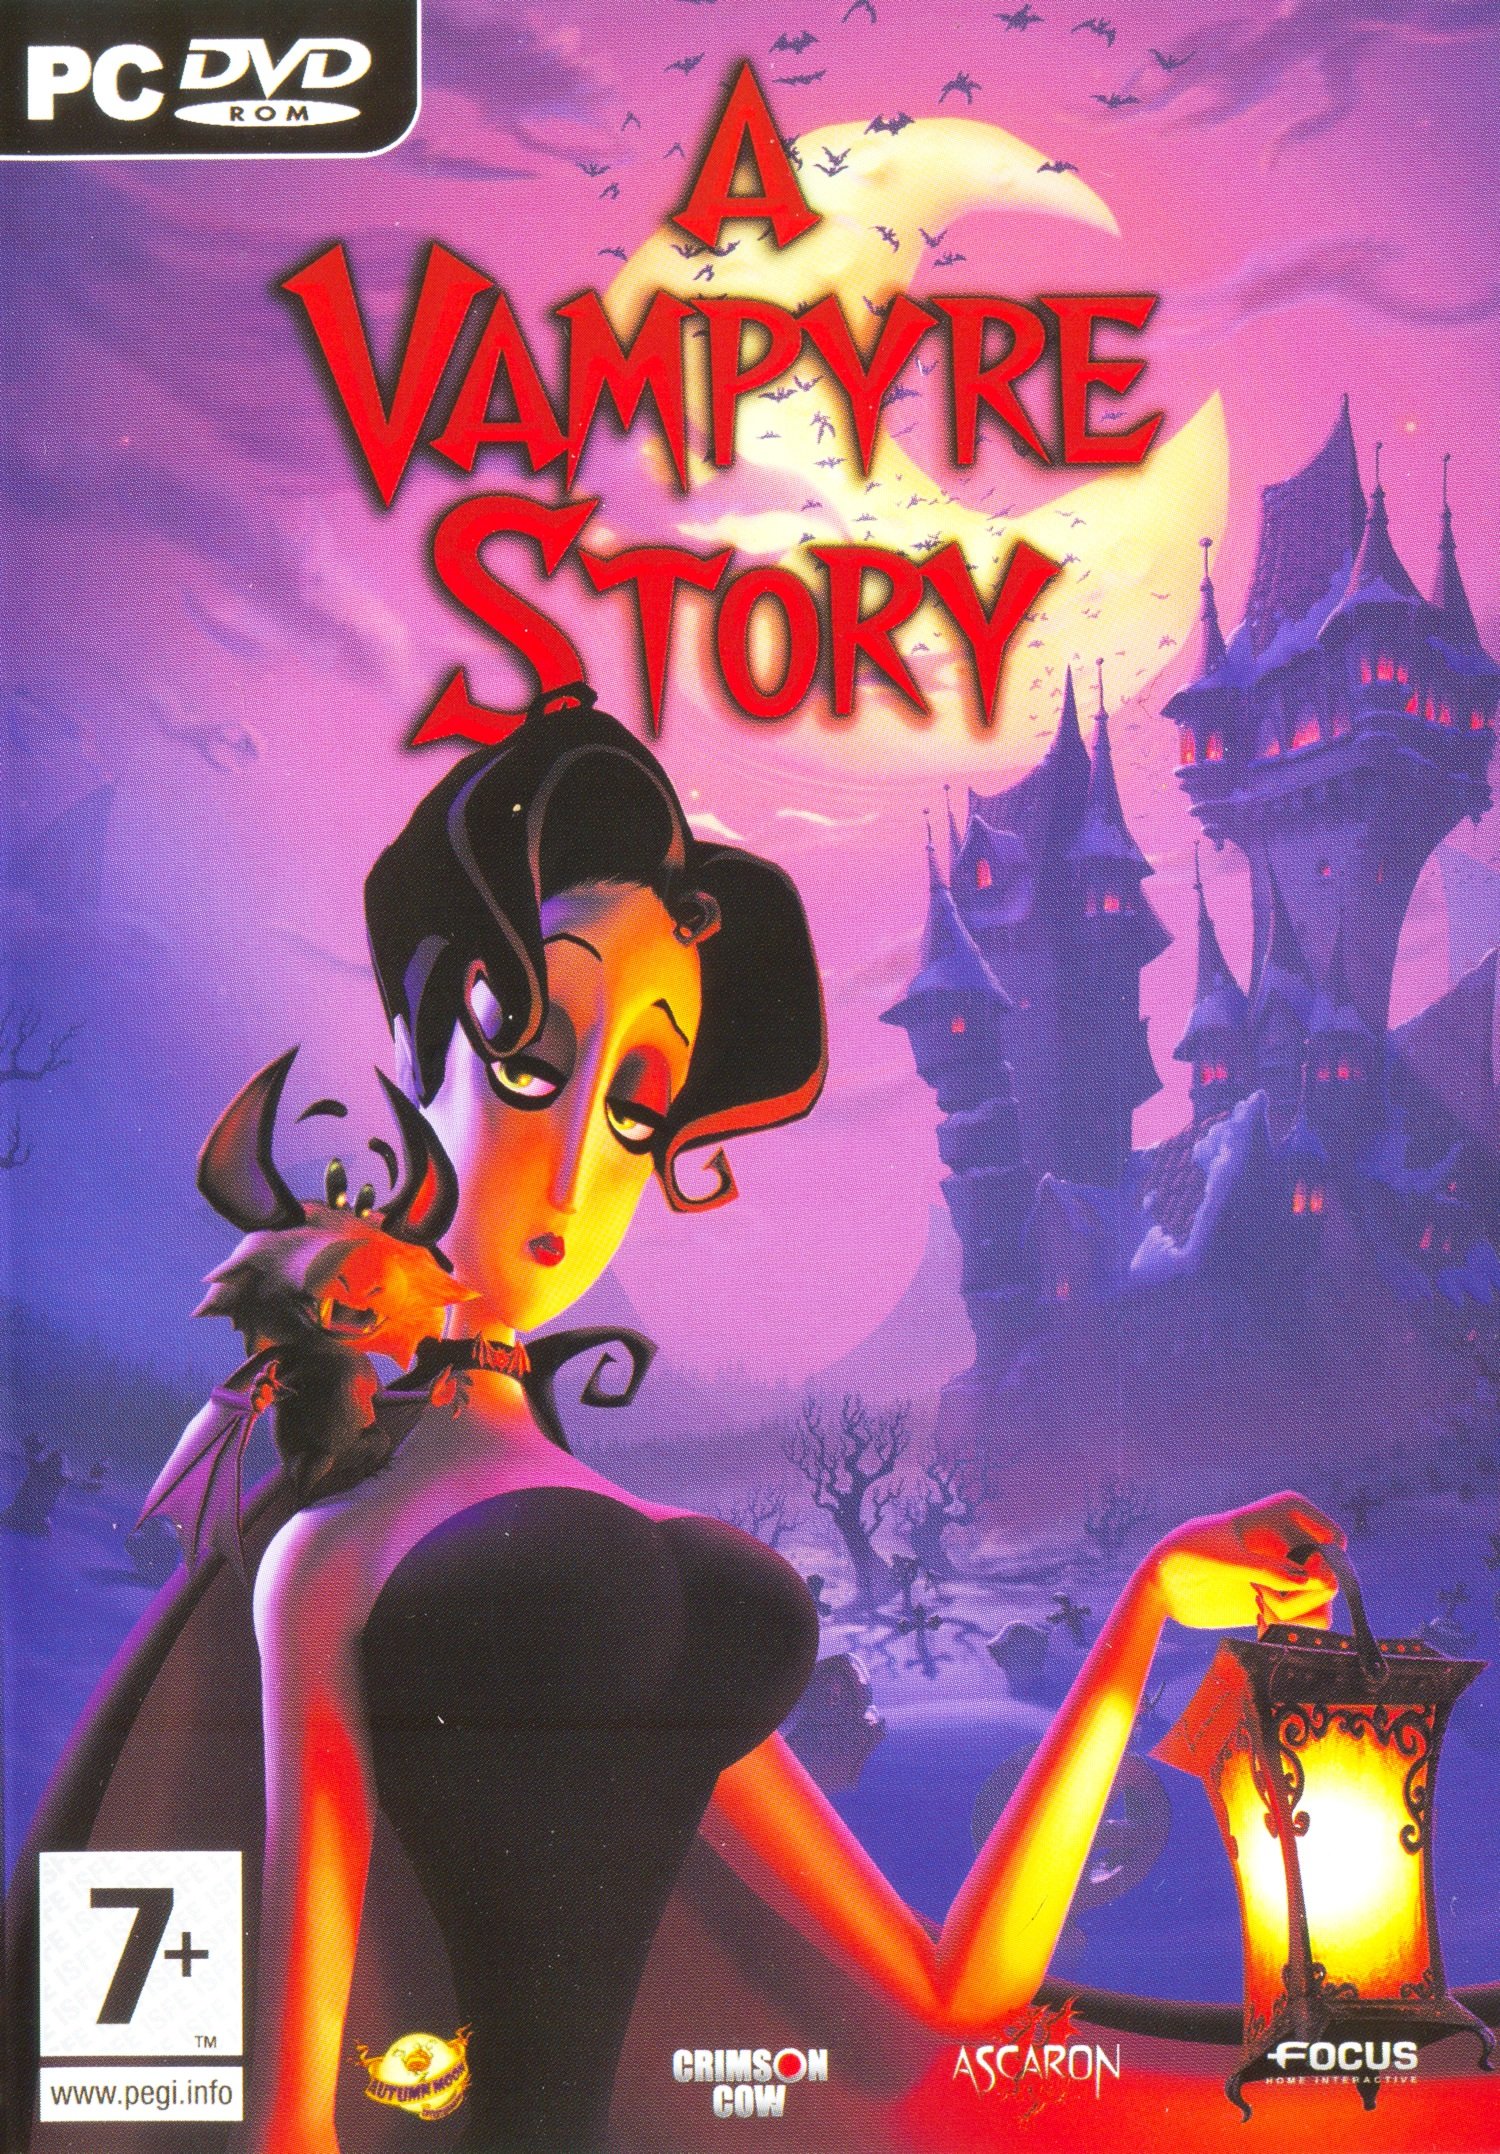 Image of A Vampyre Story